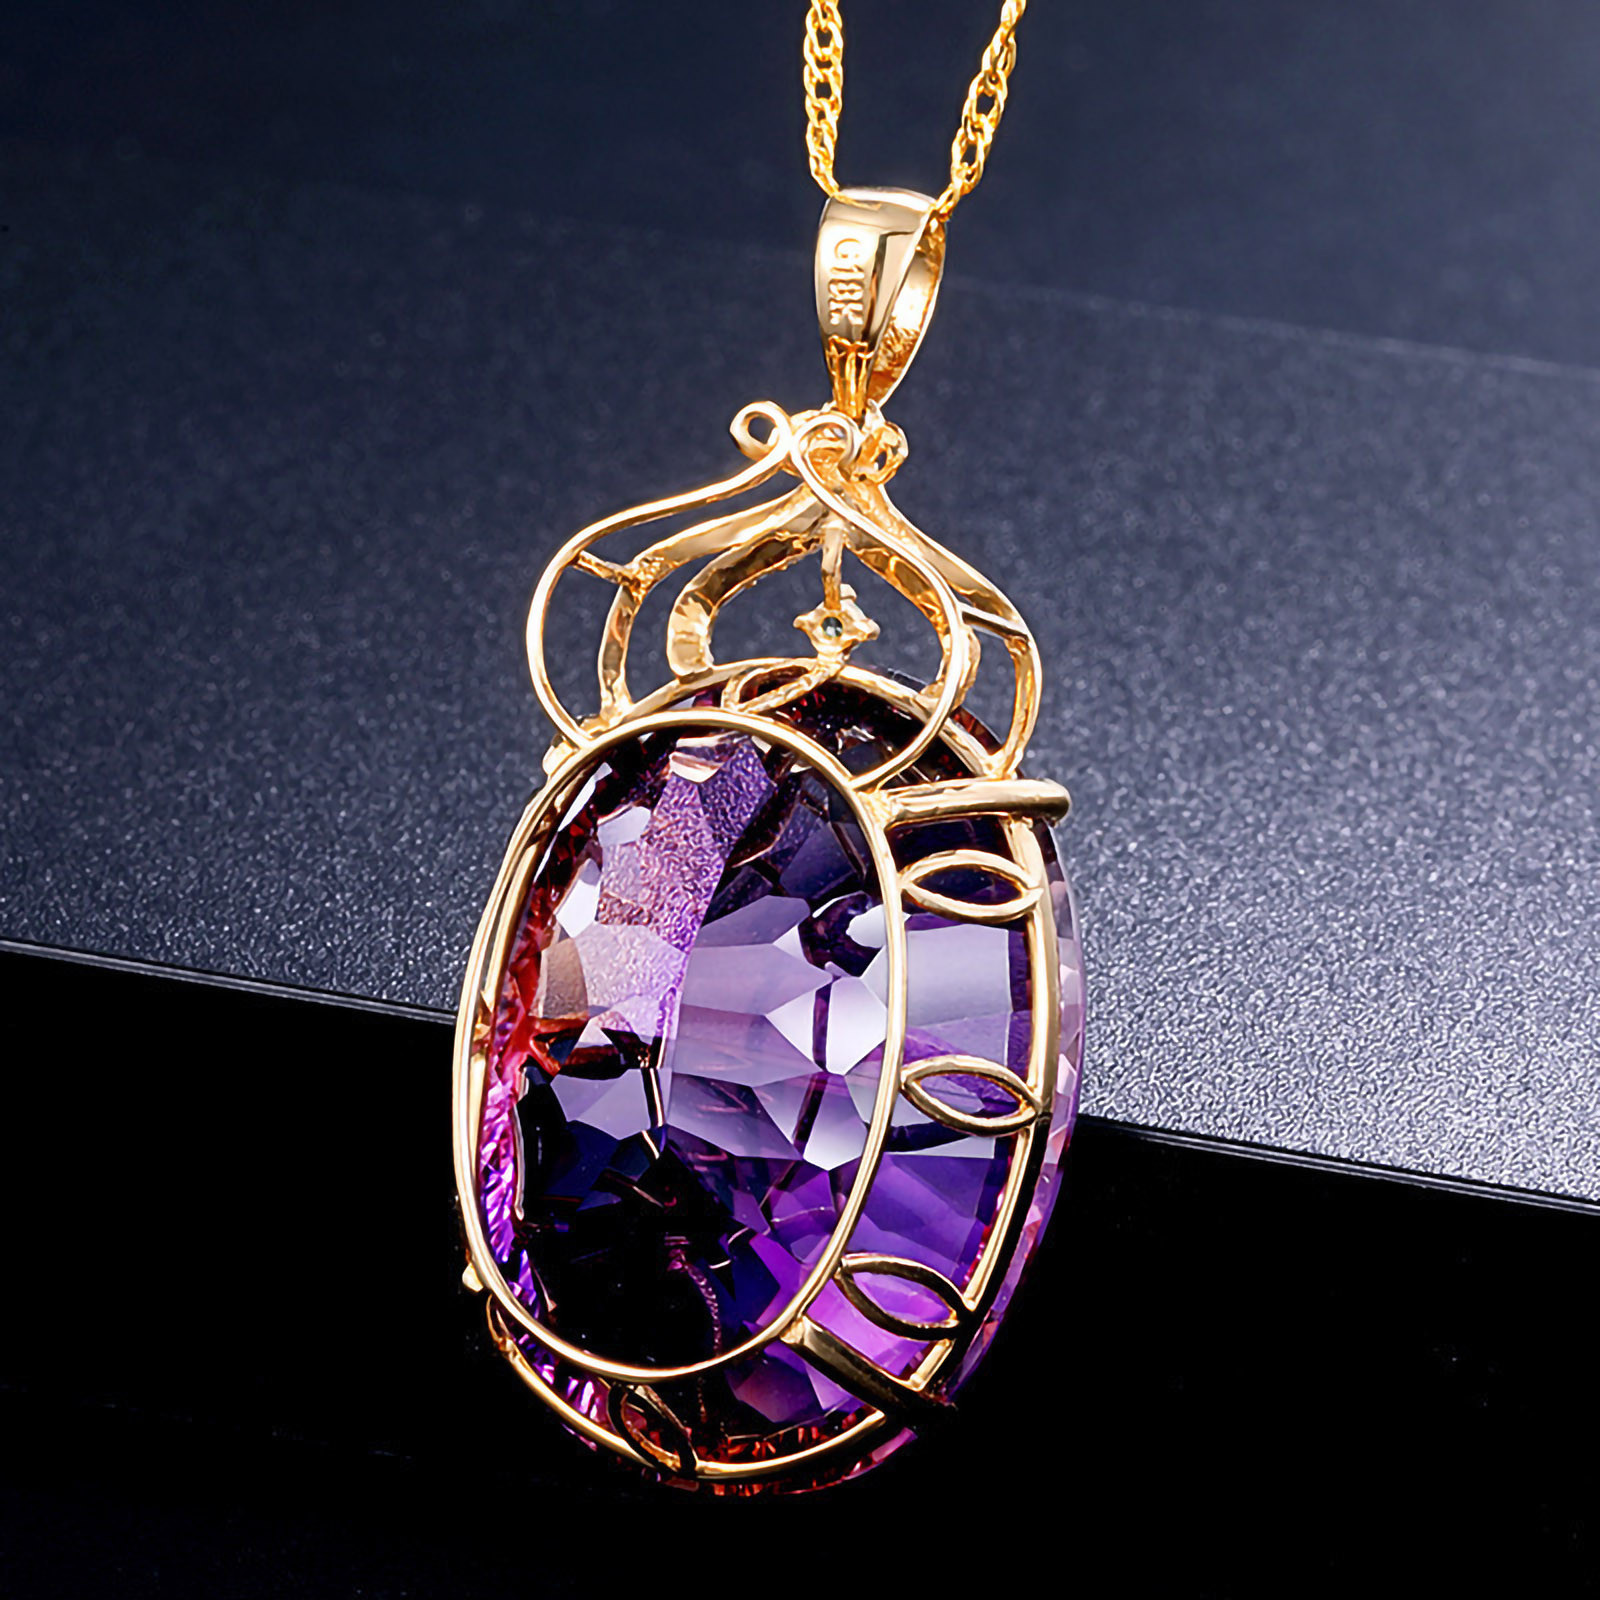 Apmemiss Wholesale European And American Ladies Fashion Luxury Amethyst Pendant Necklace Amethyst Gemstone Necklace Jewelry - image 5 of 8